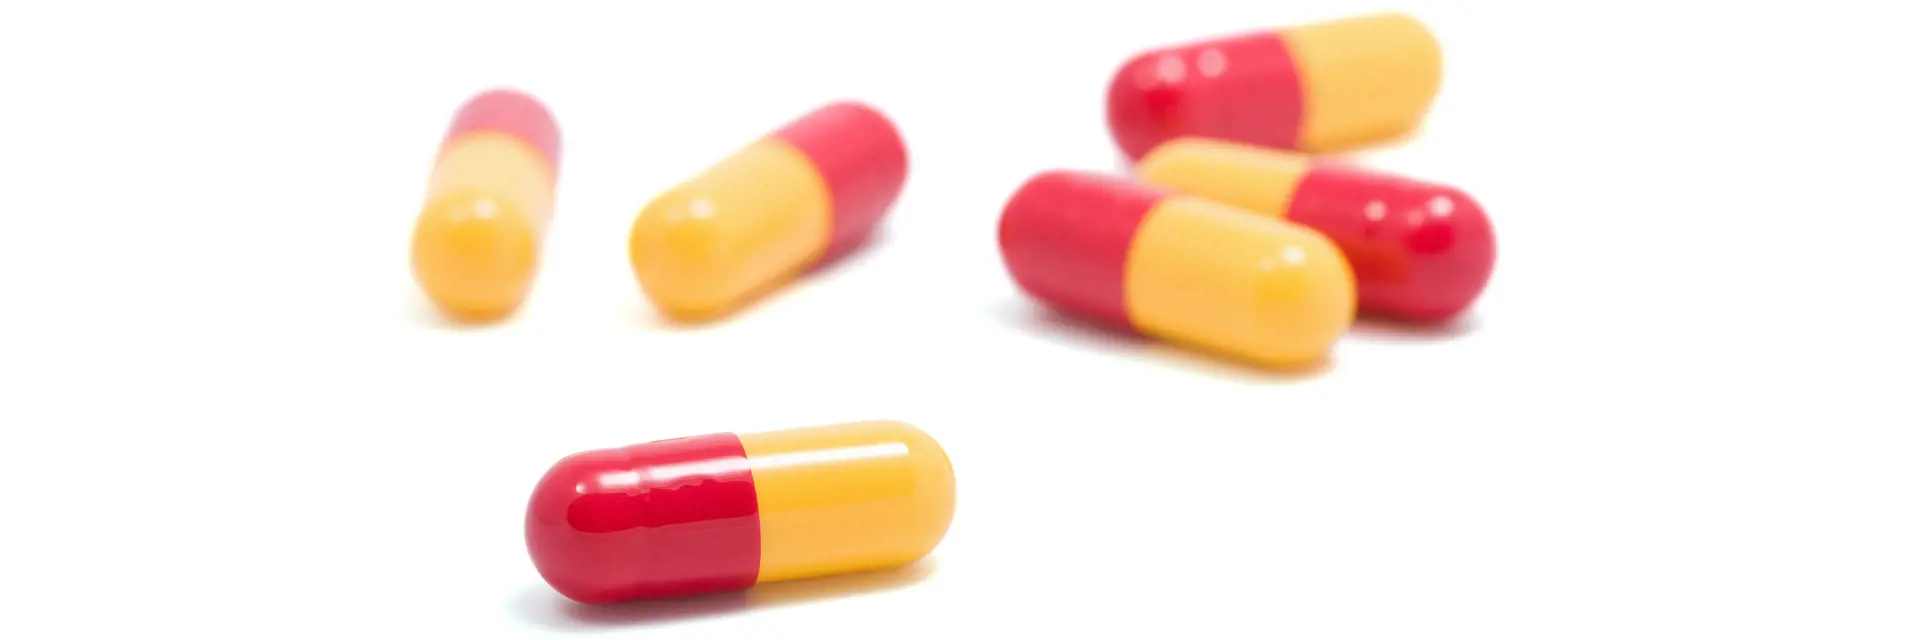 Six red and yellow medicine capsules on a white background